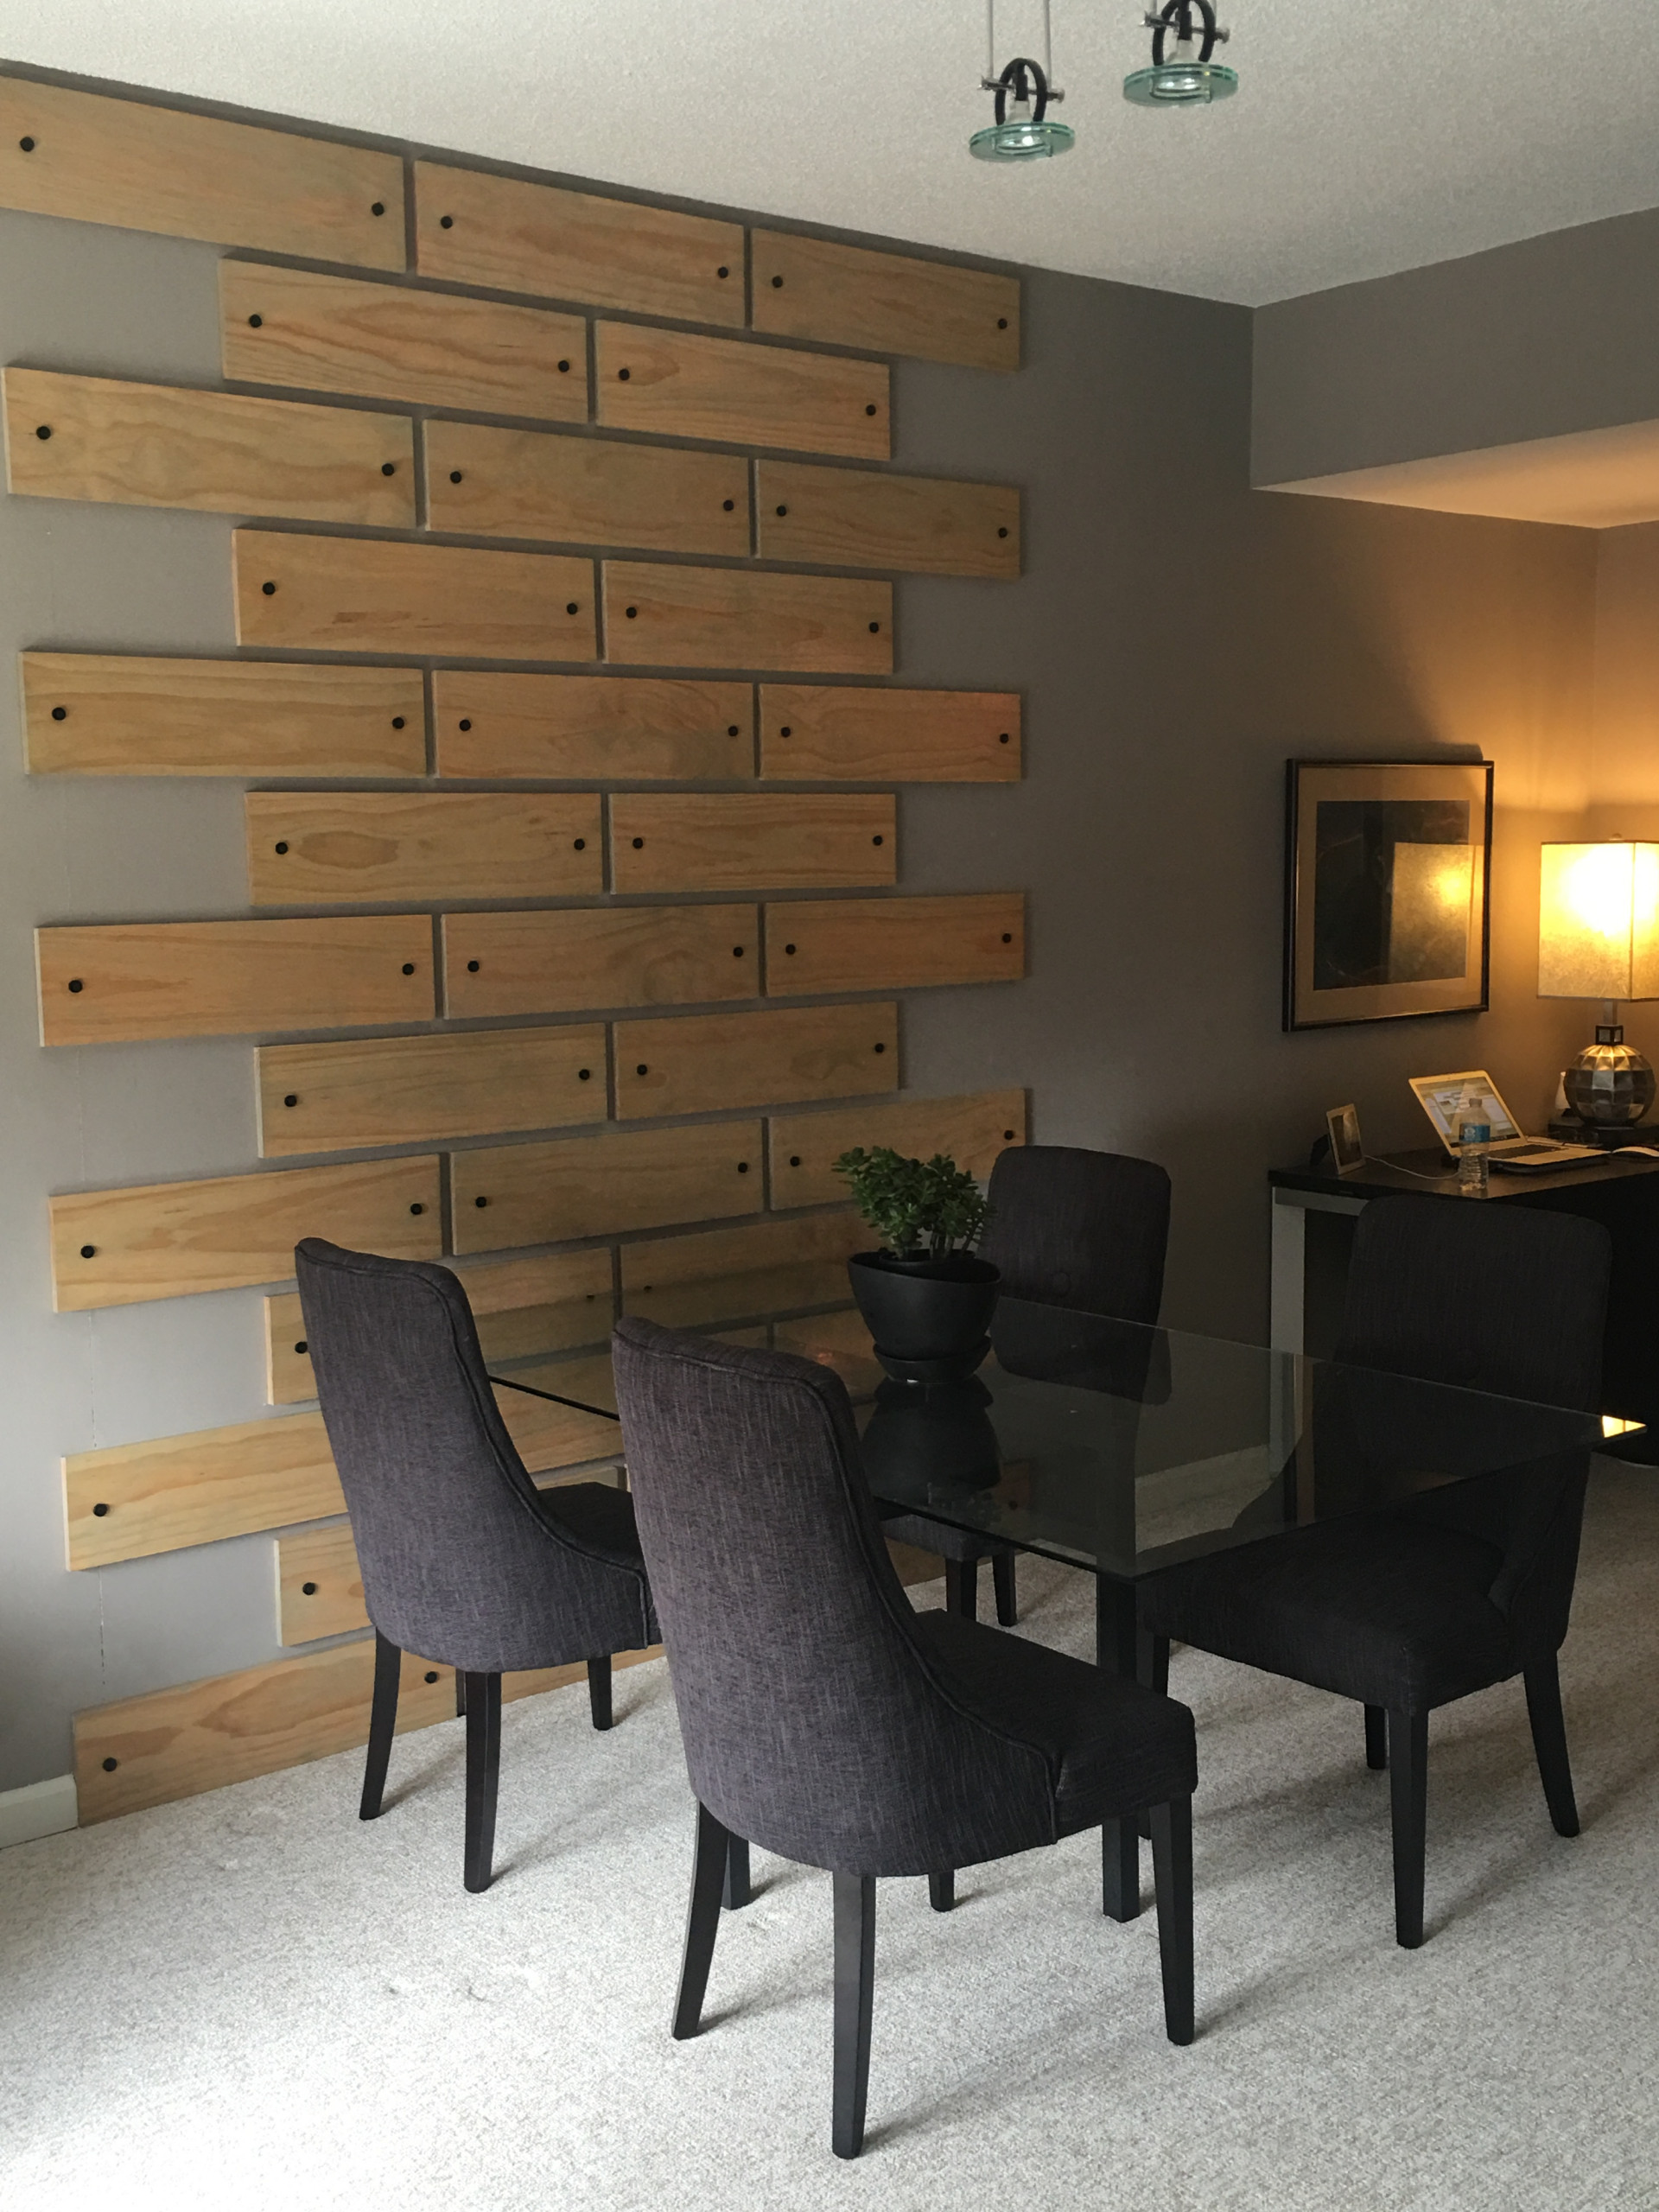 Accent wall in a high rise condo